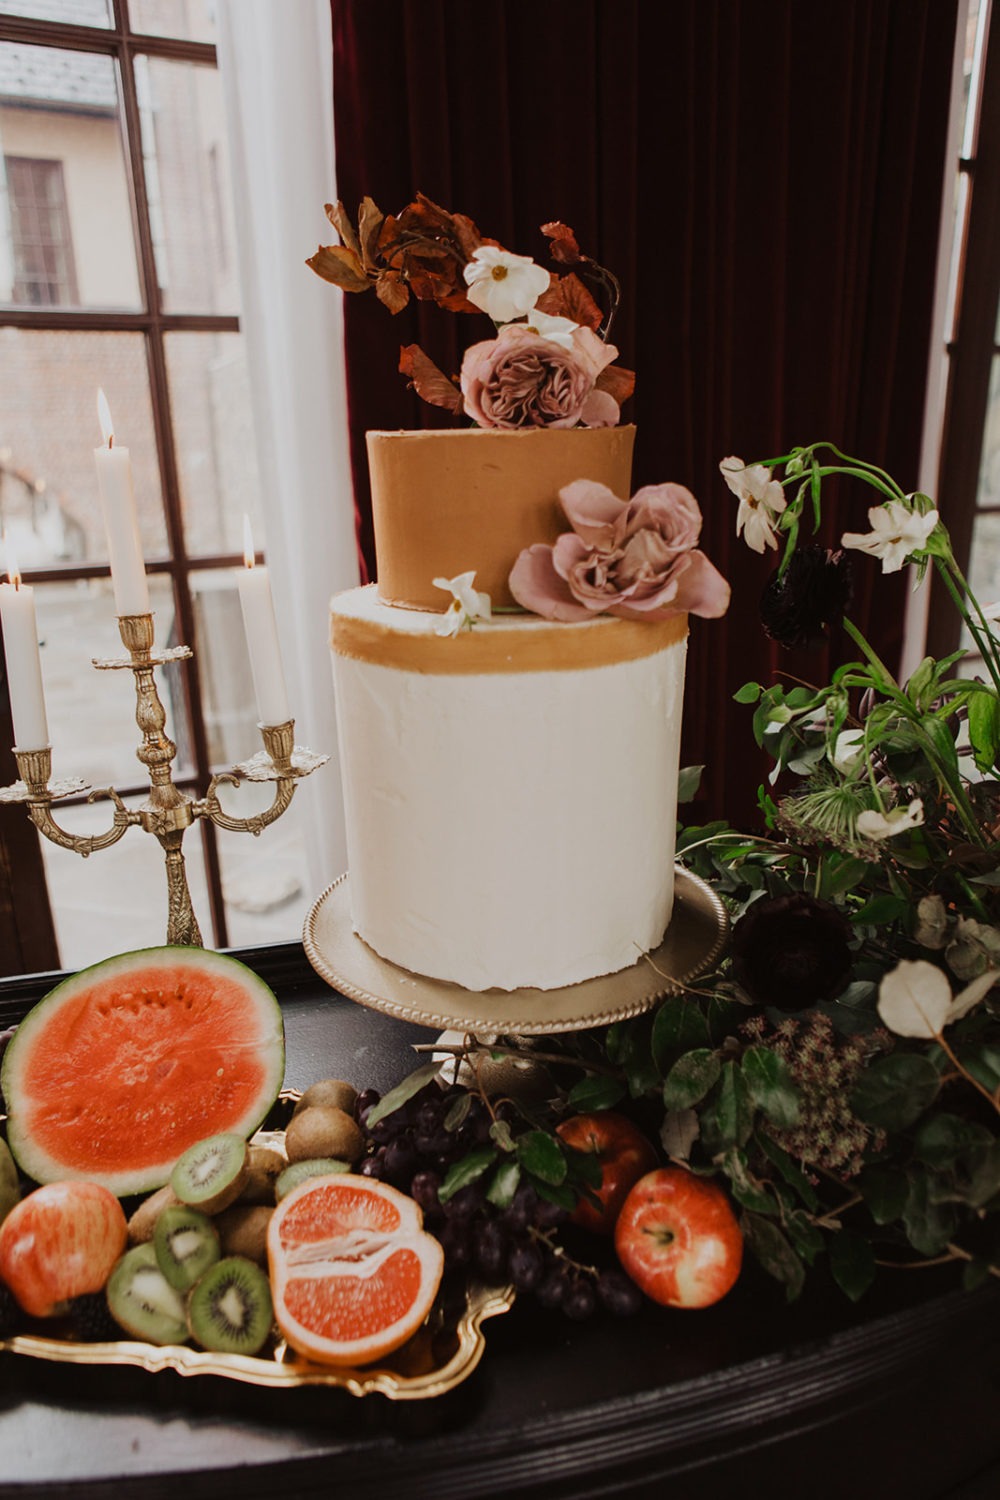 Wedding cake and fruit as decor tips for how to plan a wedding on a budget